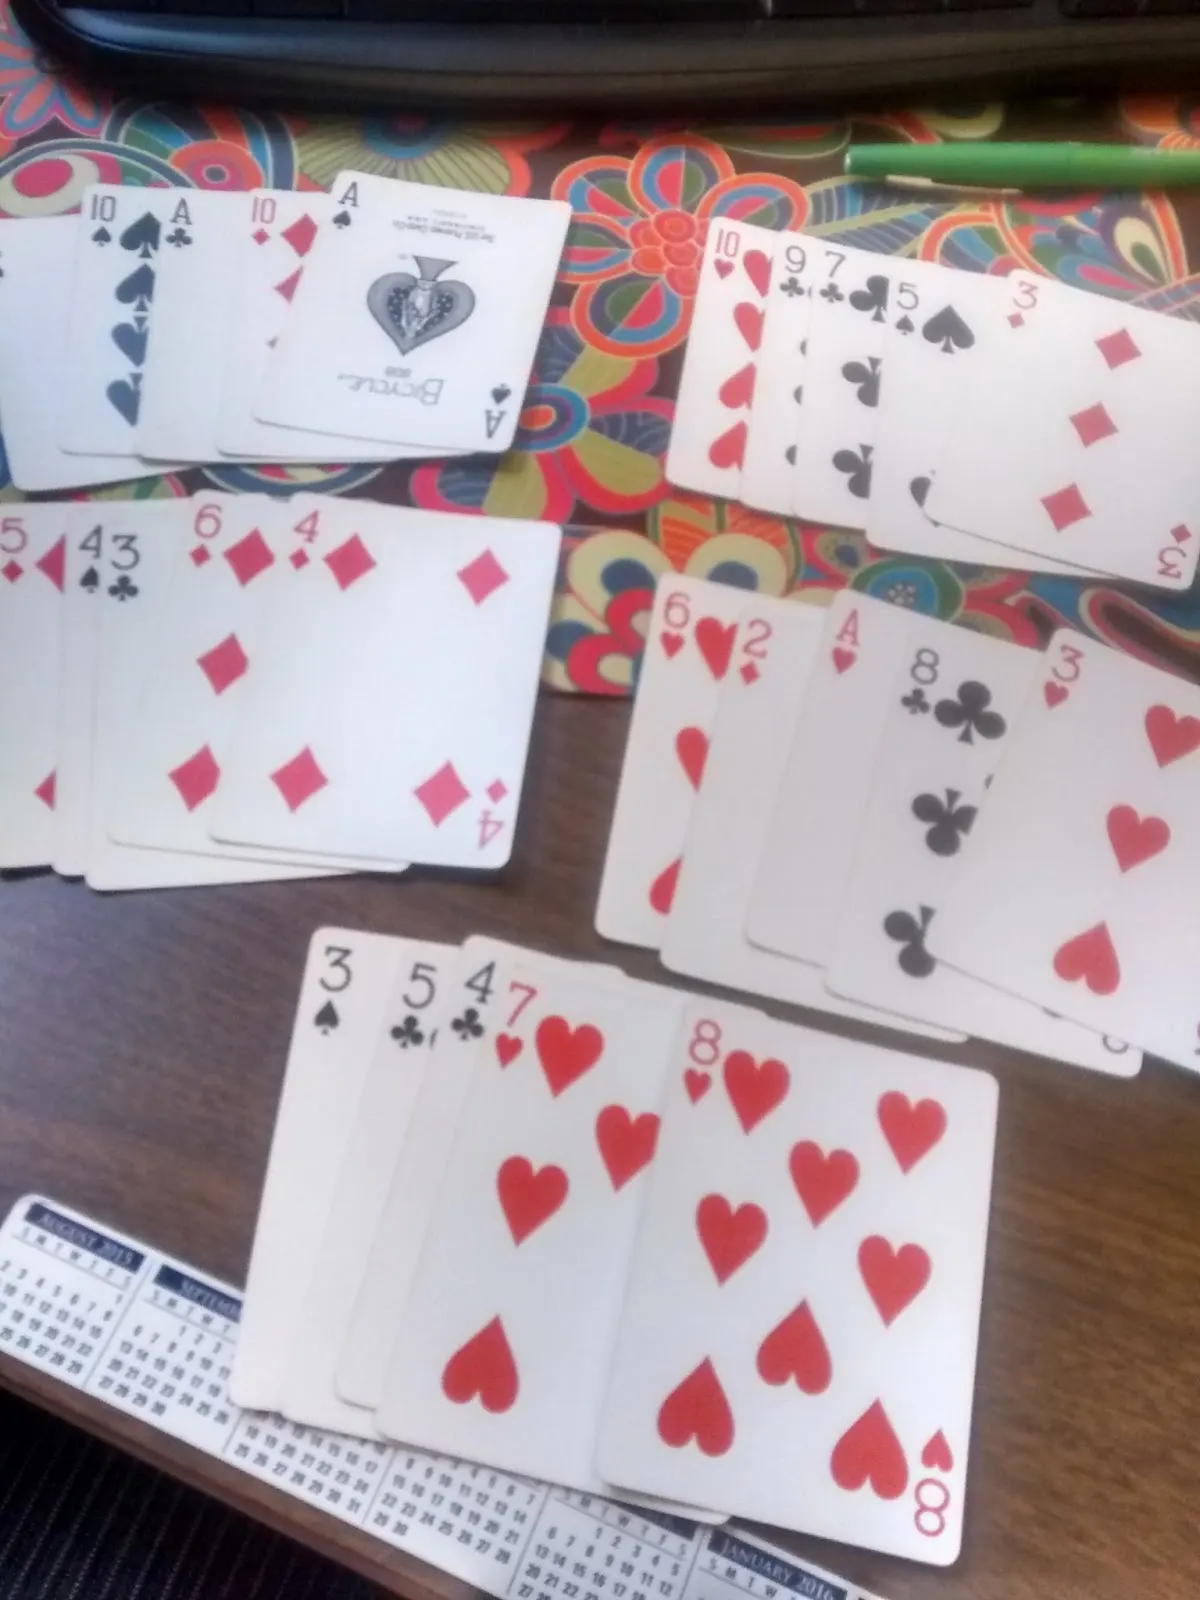 Cards laying on desk from playing 5 x 5 game from Sara Van Der Werf. 